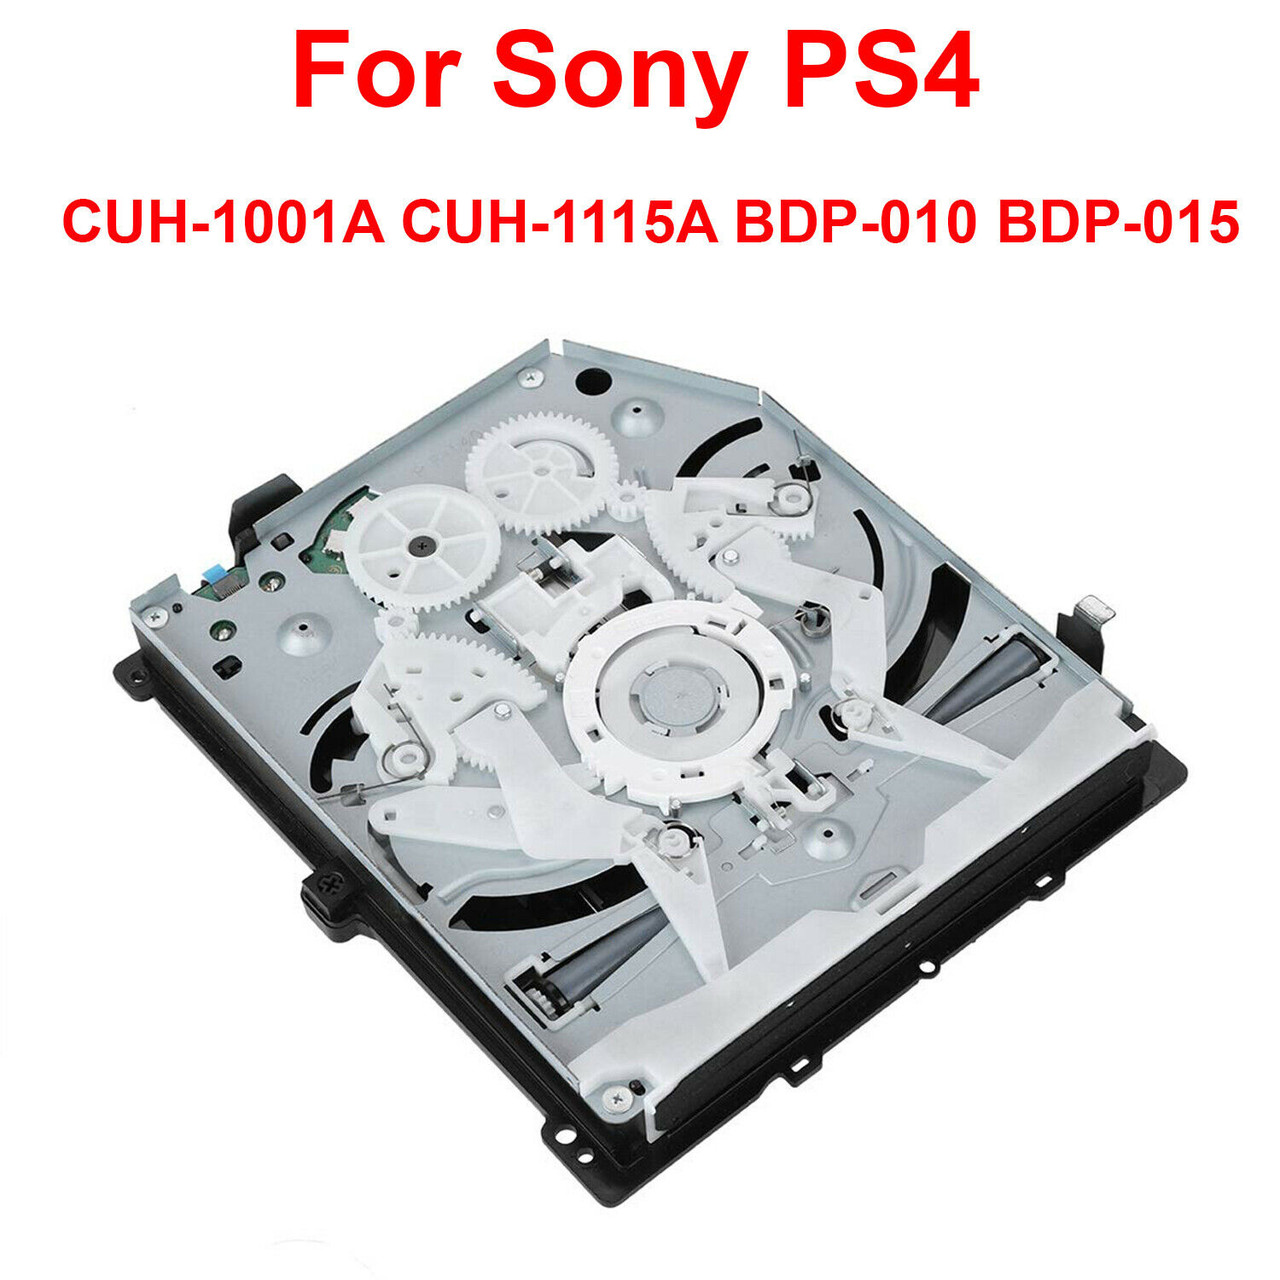 KES-860 PAA Blu-ray Disk Drive For Sony PS4 CUH-1001A CUH-1115A BDP-010 BDP-0155